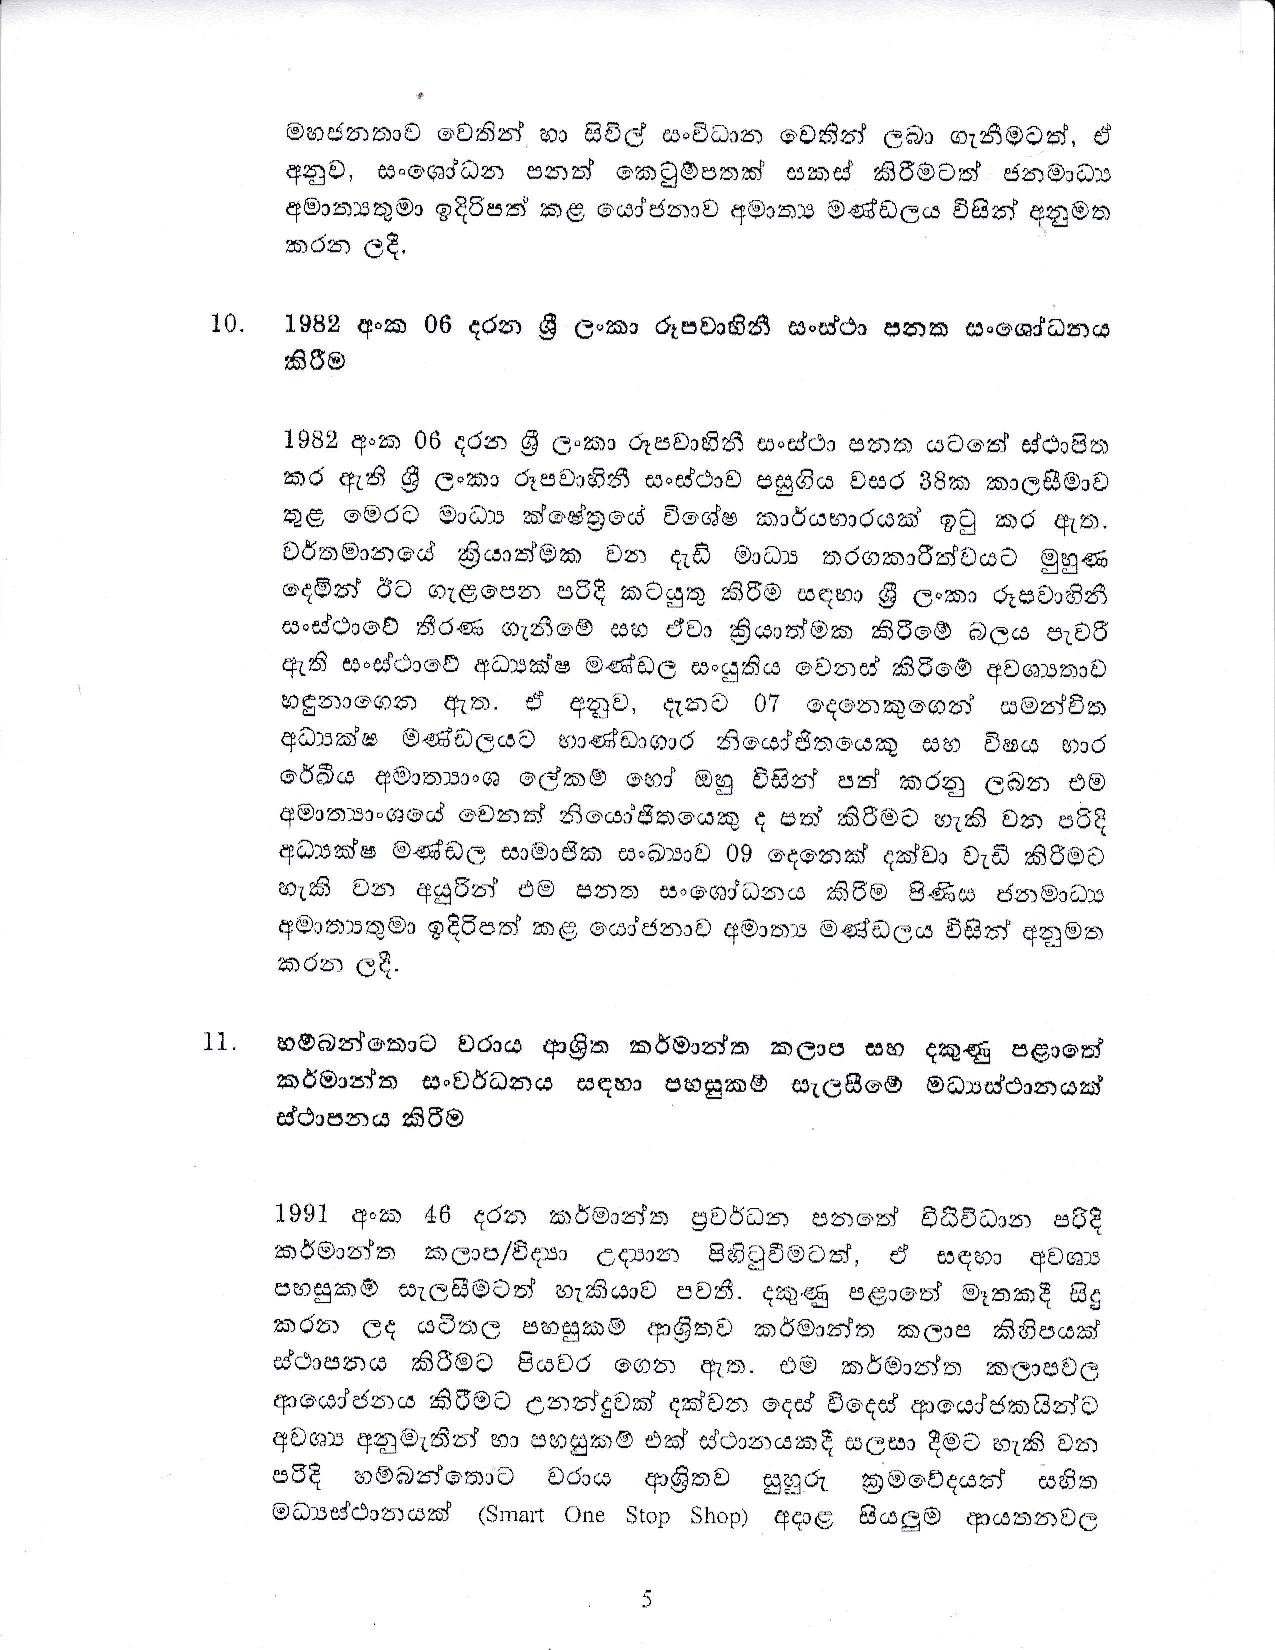 Cabinet Decision on 04.01.2021 page 005